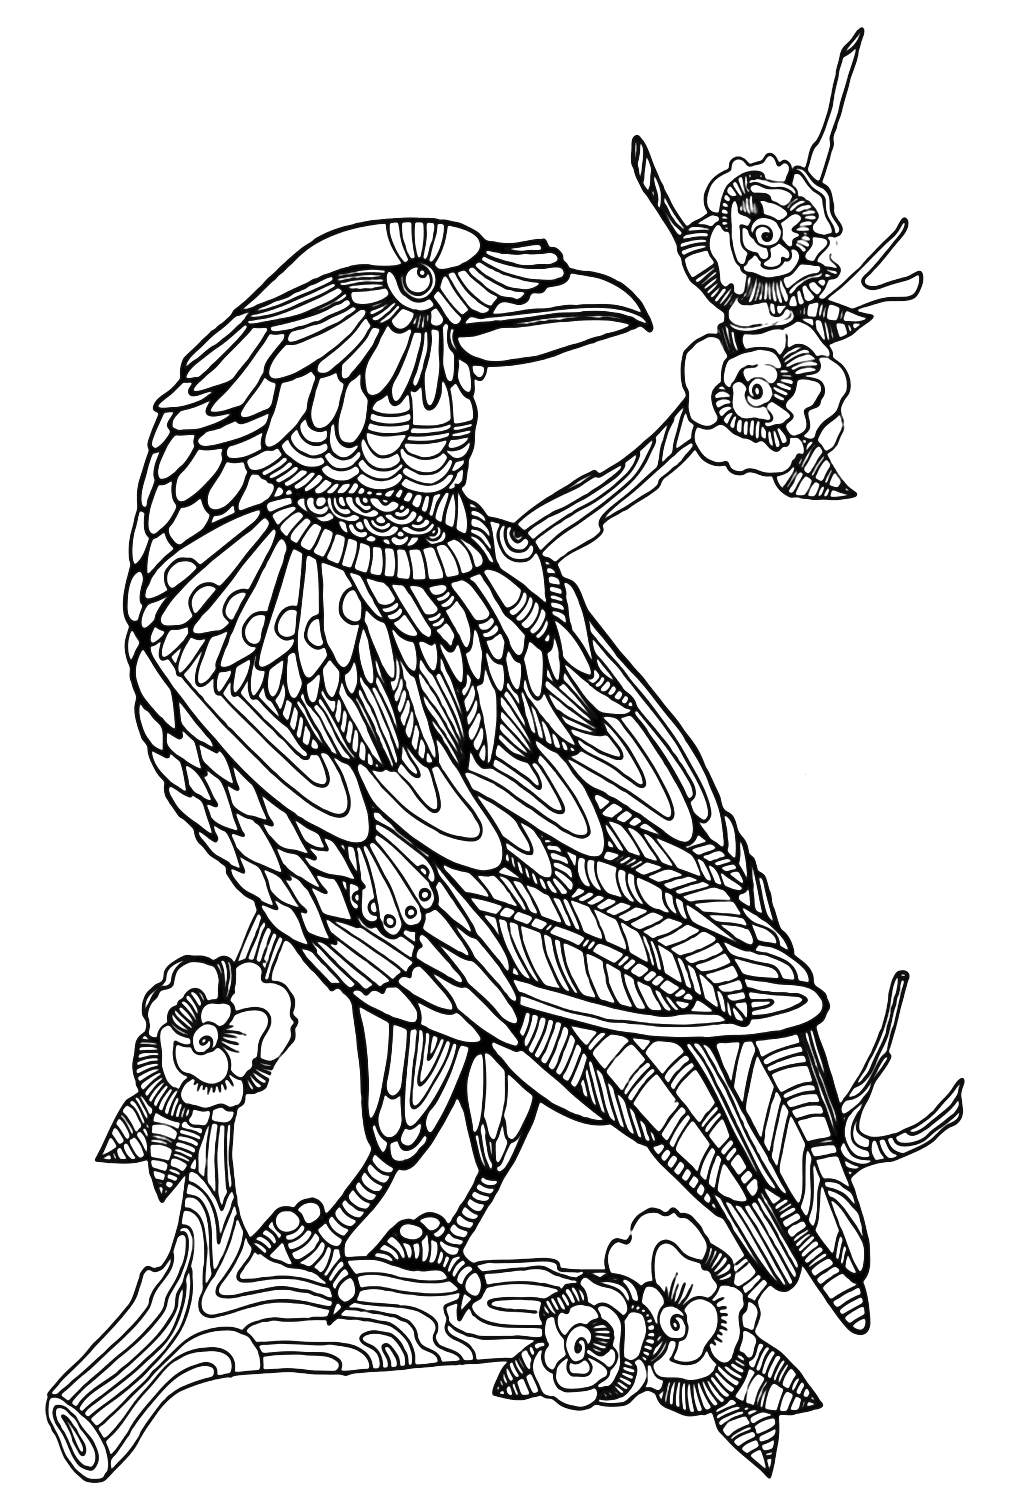 Crow Coloring Page For Adults from Animals